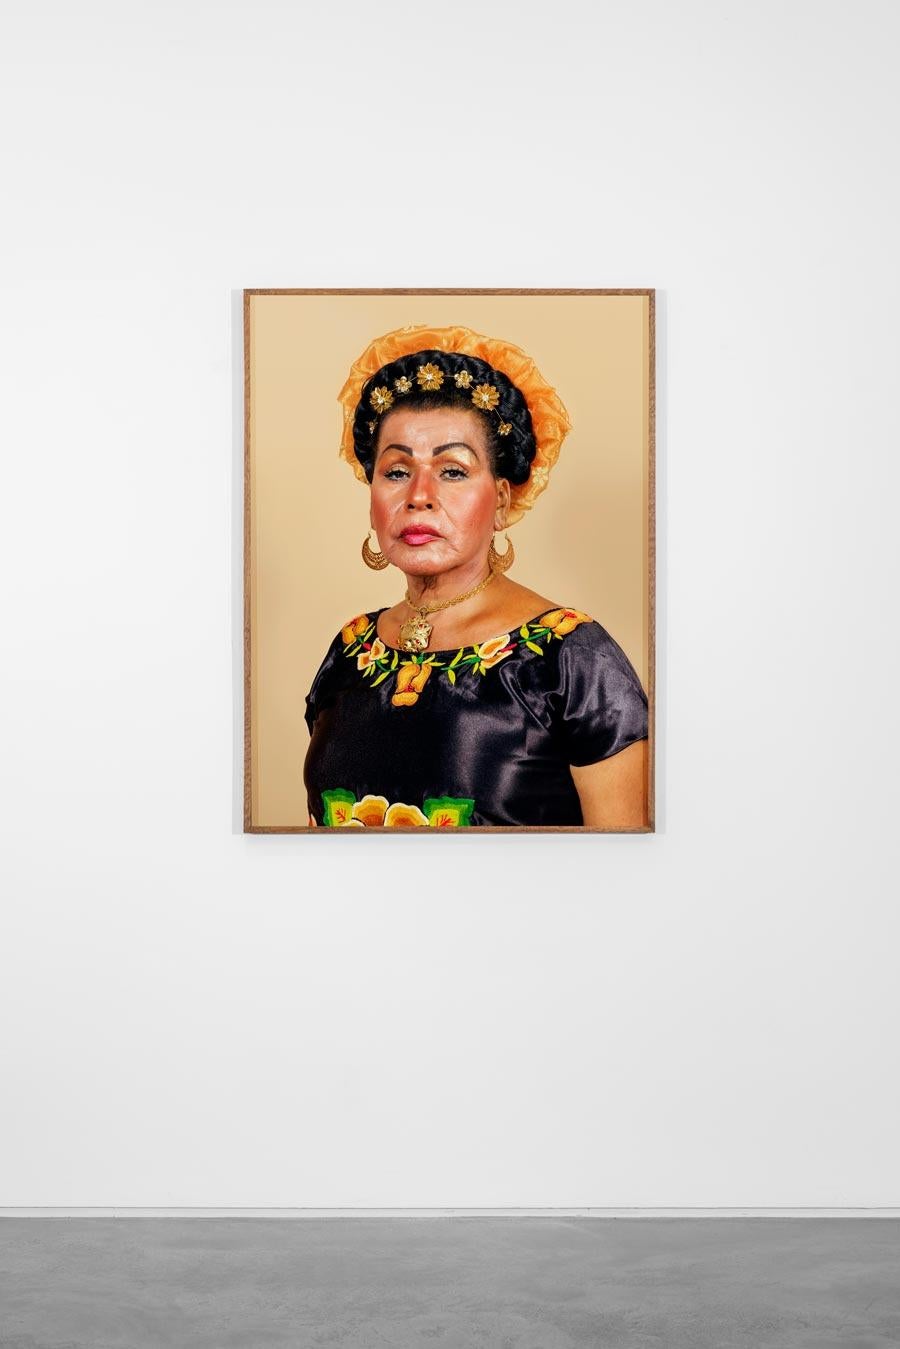 Muxe Portrait #3, Junchitán de Zaragoza - Pieter Hugo (Colour Photography)
Signed on reverse
Archival pigment print
-43 1/4 x 32 1/4 inches: $24,000
From an edition of 7 + 2 APs

Pieter Hugo (born 1976) is a South African artist who, through his